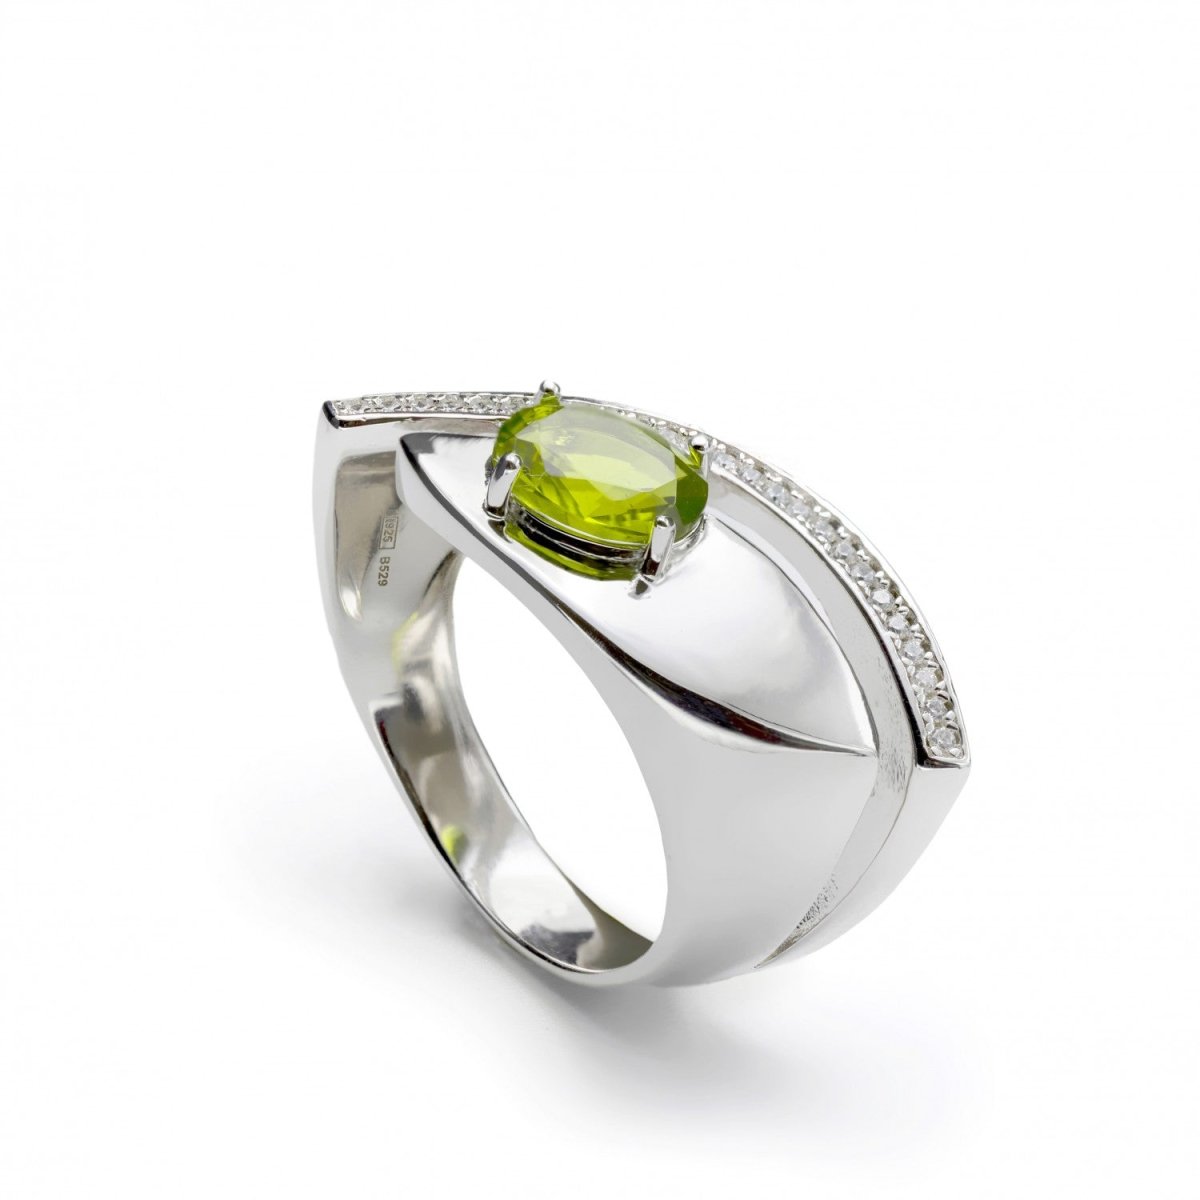 Ring - Large abstract design rings with green gemstone